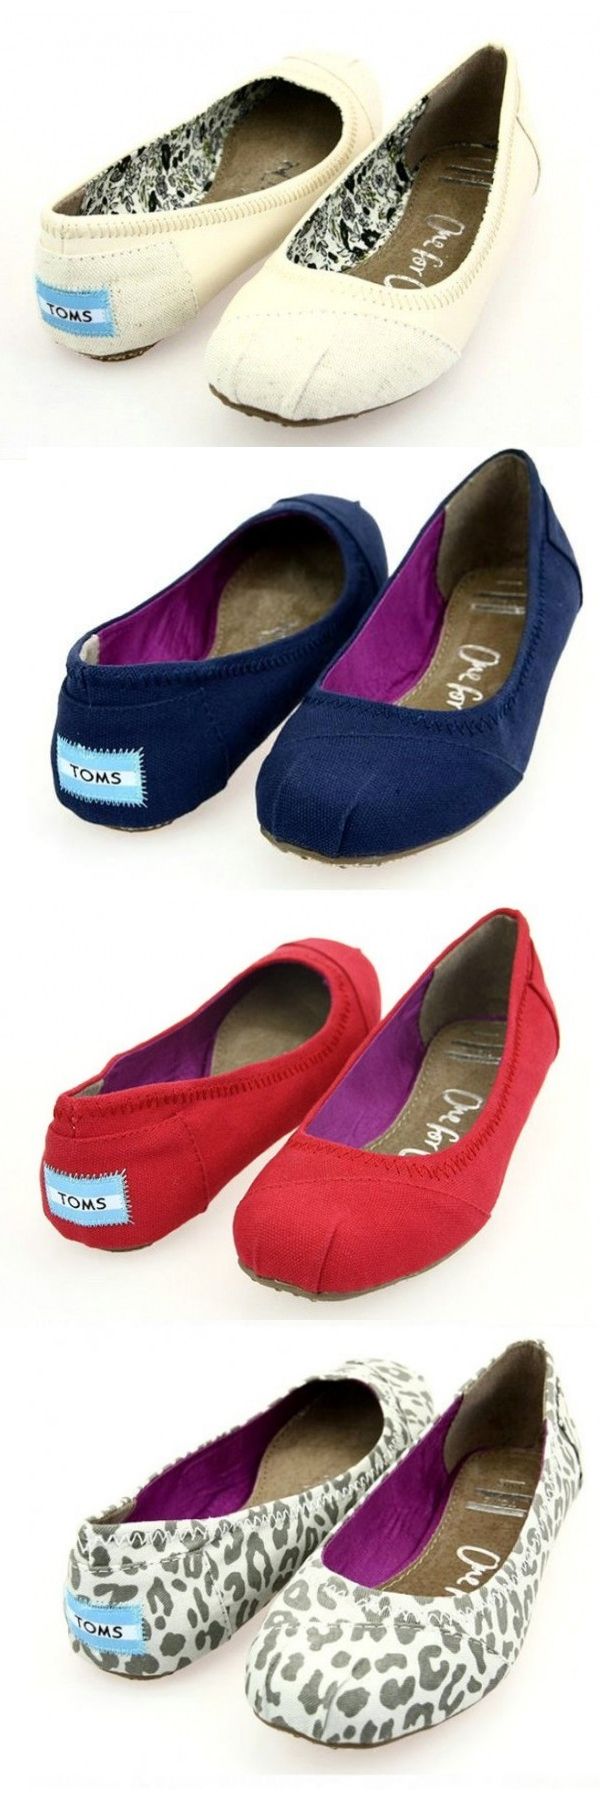 Give Back With Toms Cute Ballet Flats! - Kathy Maguire